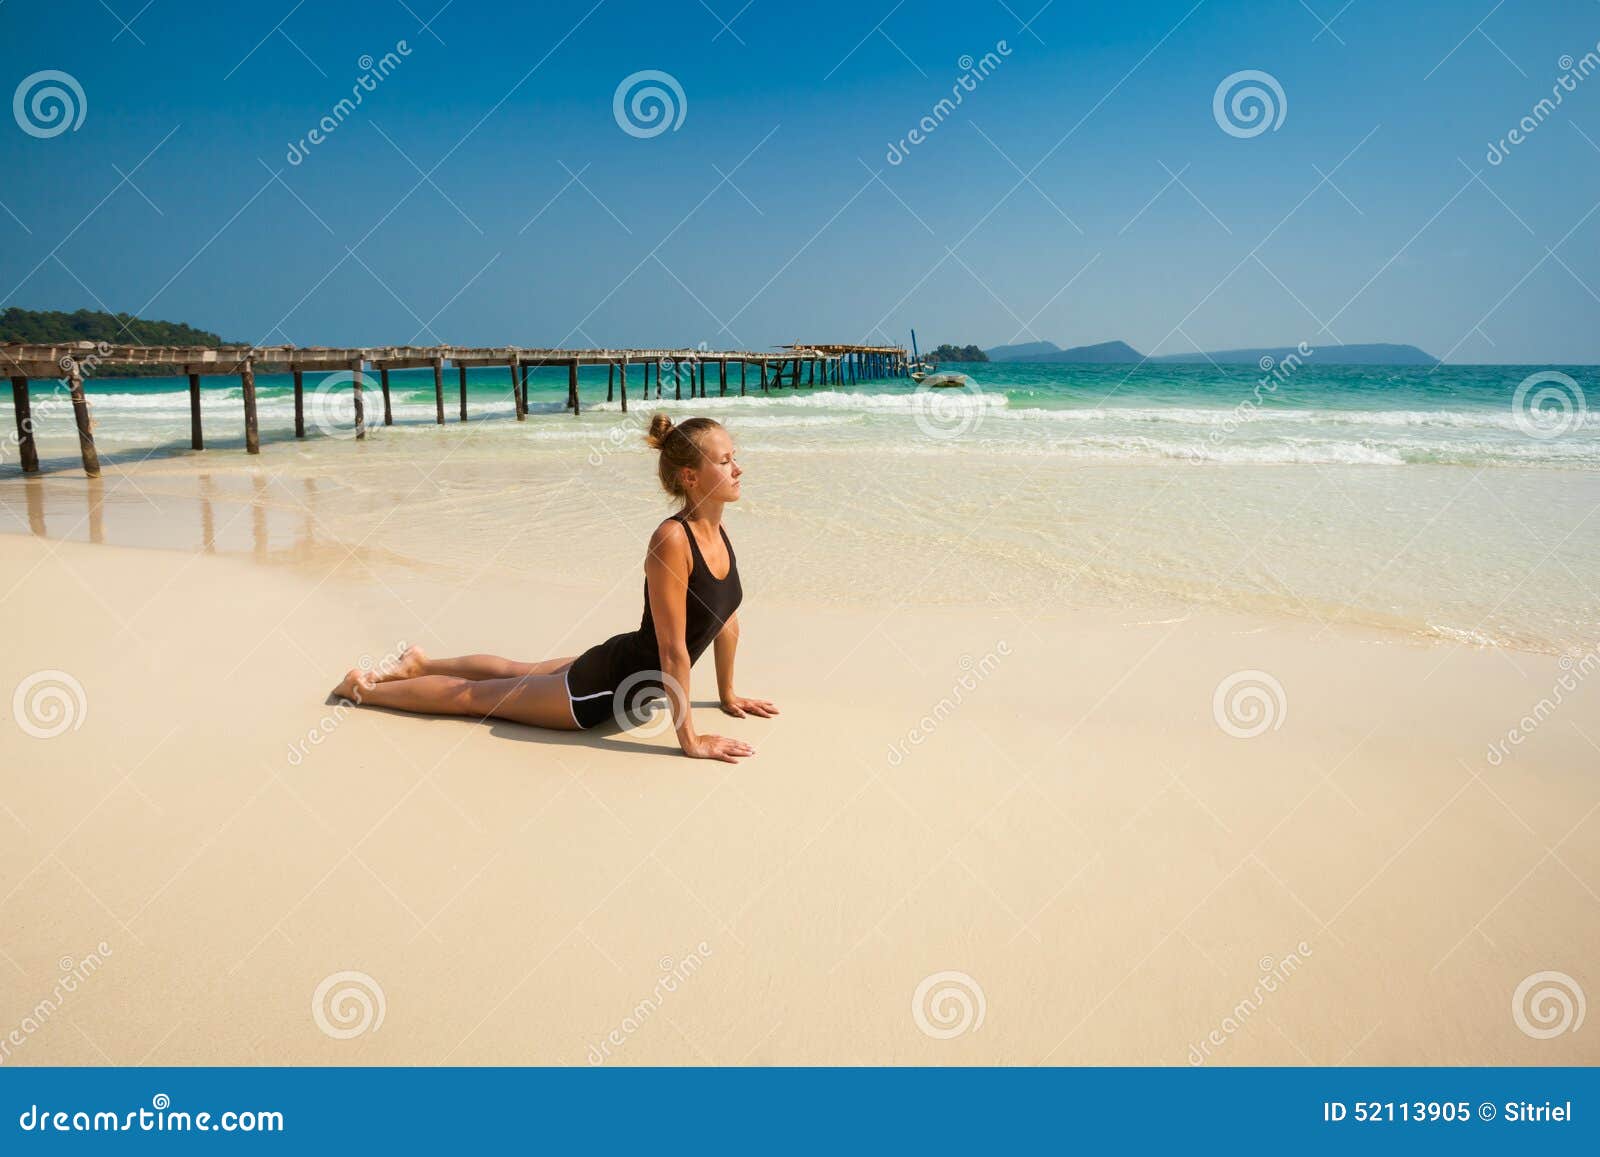 Summer Yoga Session In Beautiful Tropical Island Stock Image Image Of Activity Like